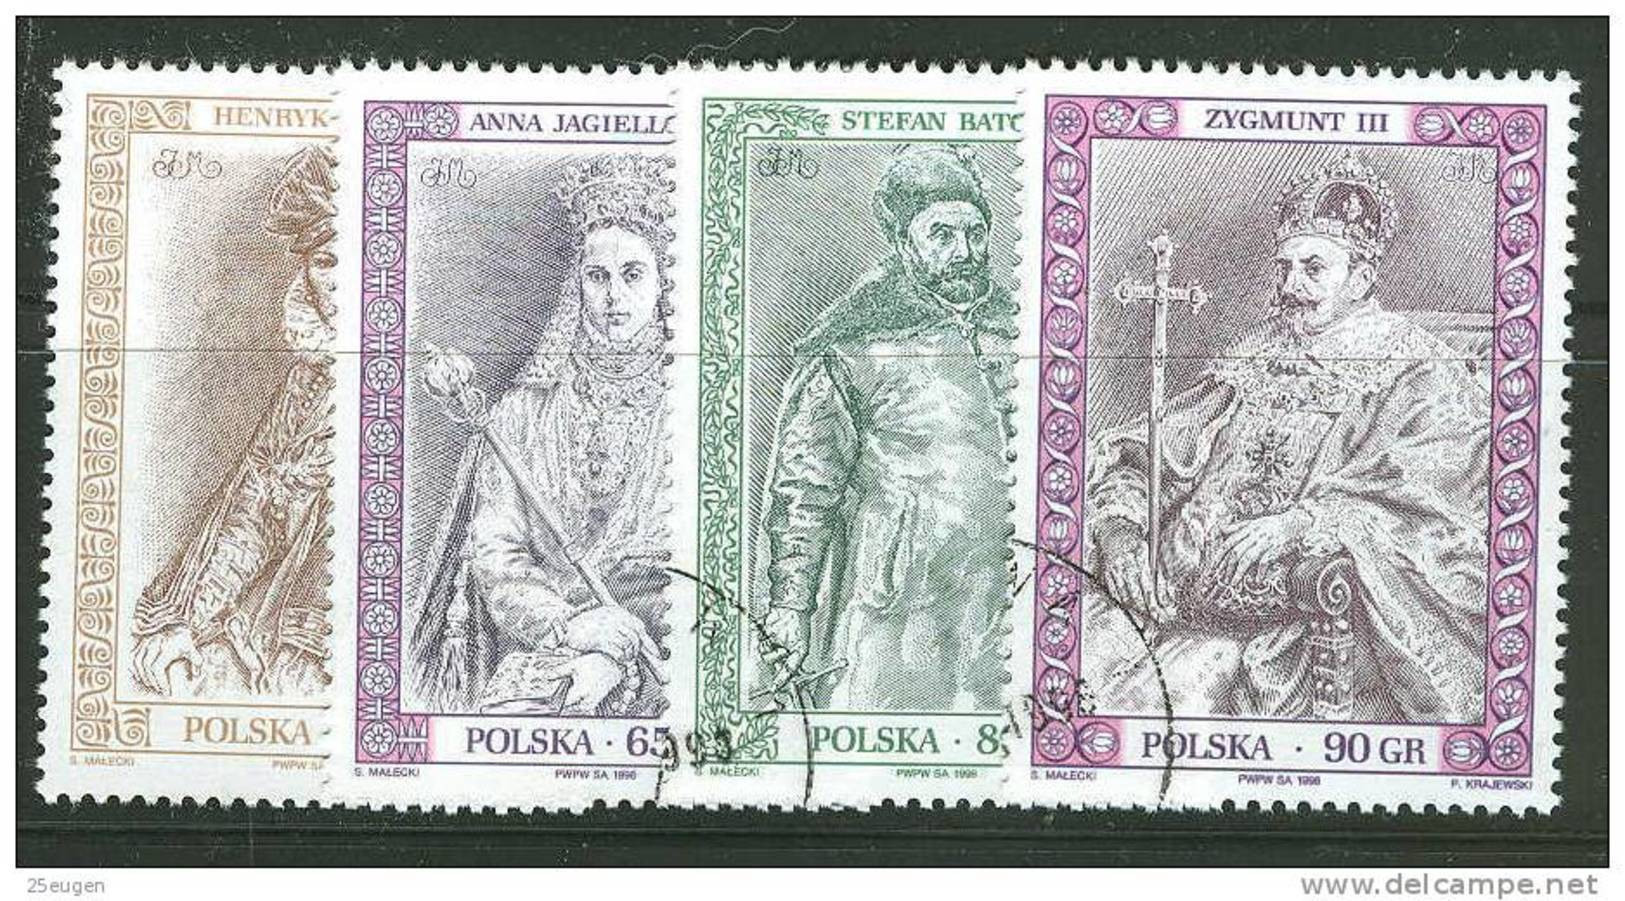 POLAND 1998 MICHEL No: 3702-3705 USED - Used Stamps